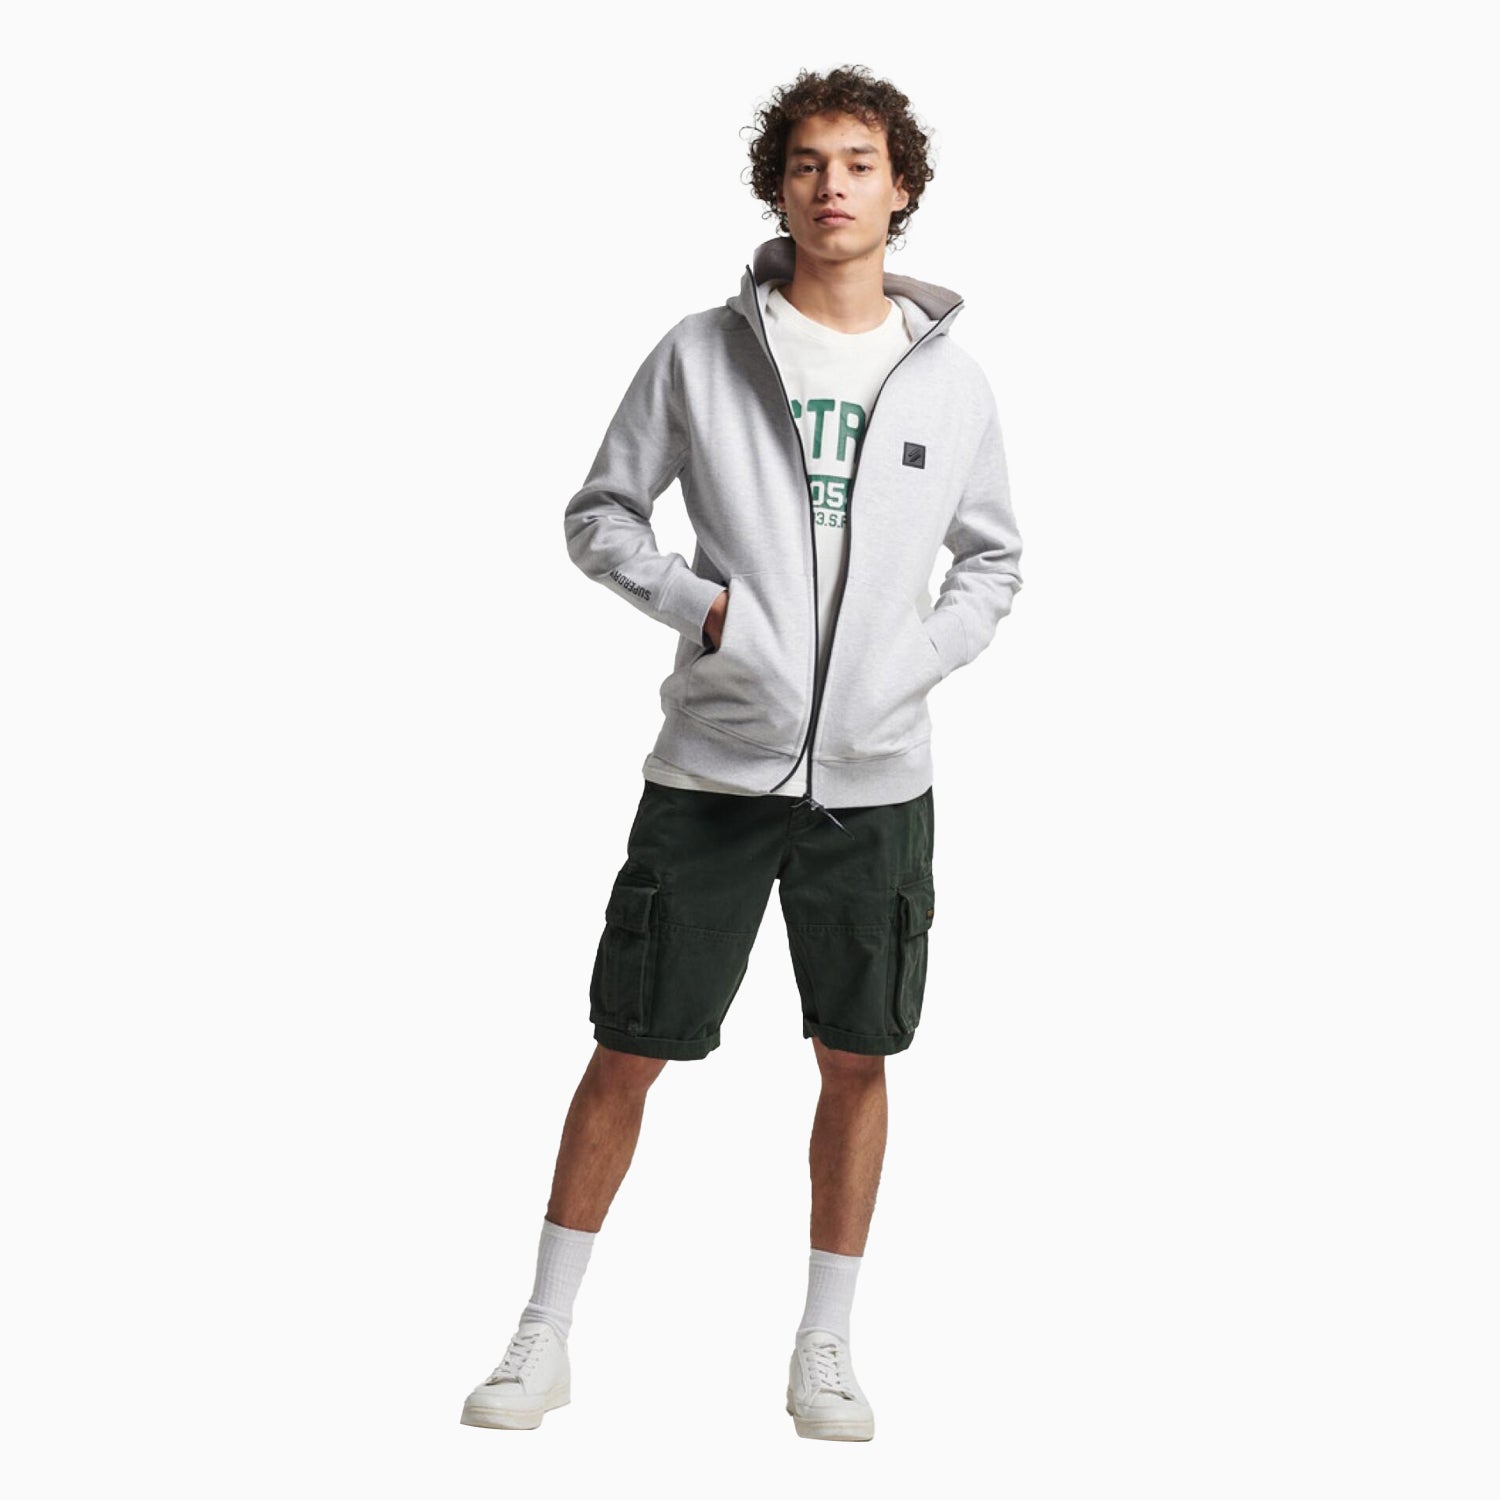 Superdry Men's Code Tech Tracksuit - Color: Cadet Grey Marl - Tops and Bottoms USA -